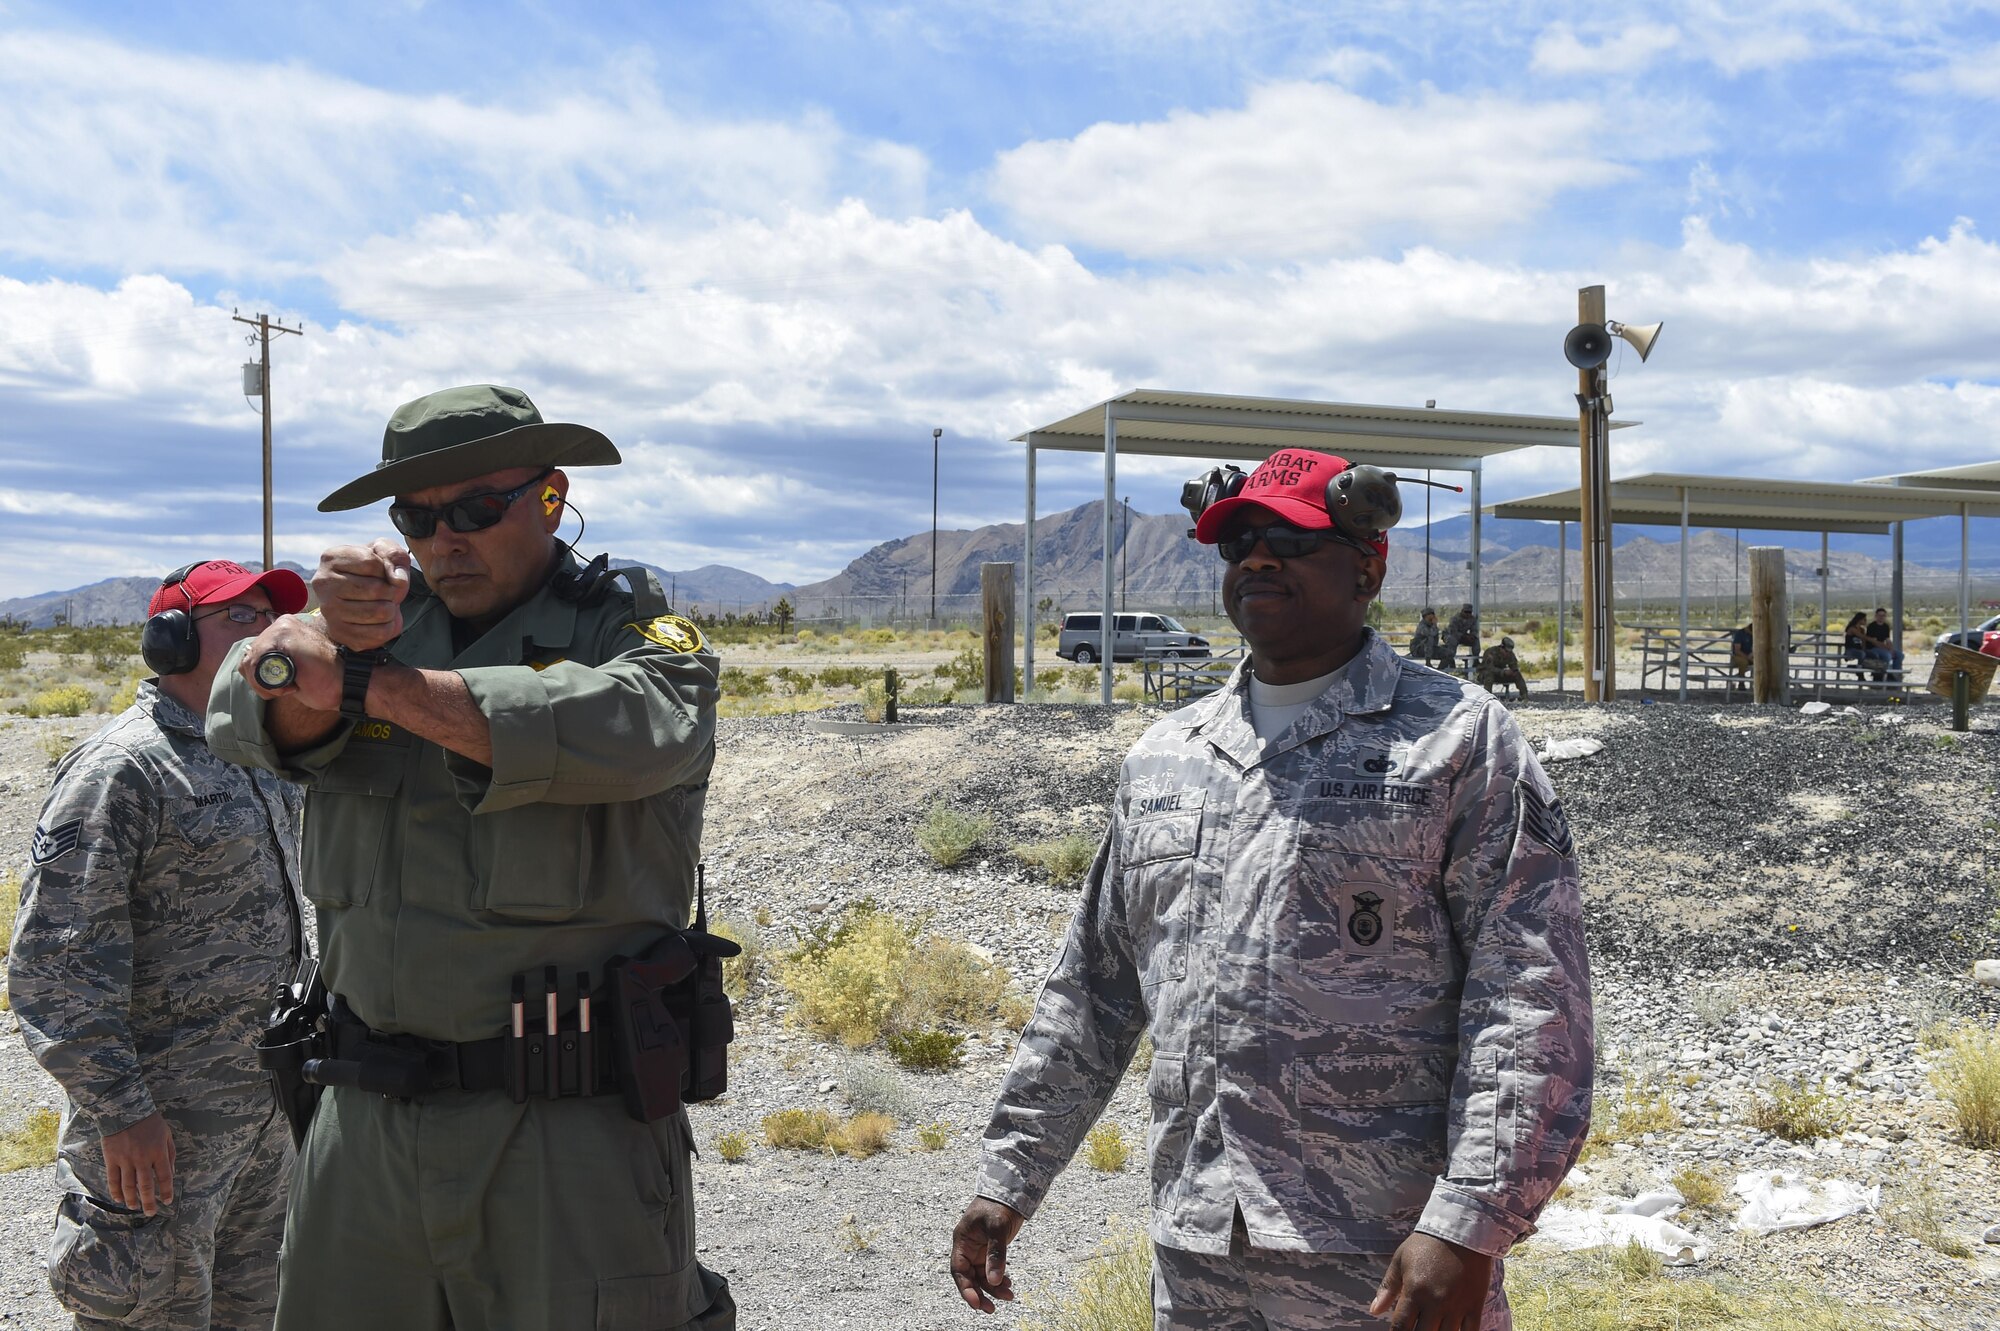 Tech Sgt. Errol 799th Security Forces Combat Arms Training and Maintenance instructor helps Metropolitan Police Officer Ramos prepare for his shooting course May 15, 2016, at Silver Flag Alpha, Nev. Air Force Security Forces and local law enforcement came together for National Police Week to honor the service and sacrifice of civilian and military law enforcement members. (U.S. Air Force photo Airman 1st Class Adarius Petty)